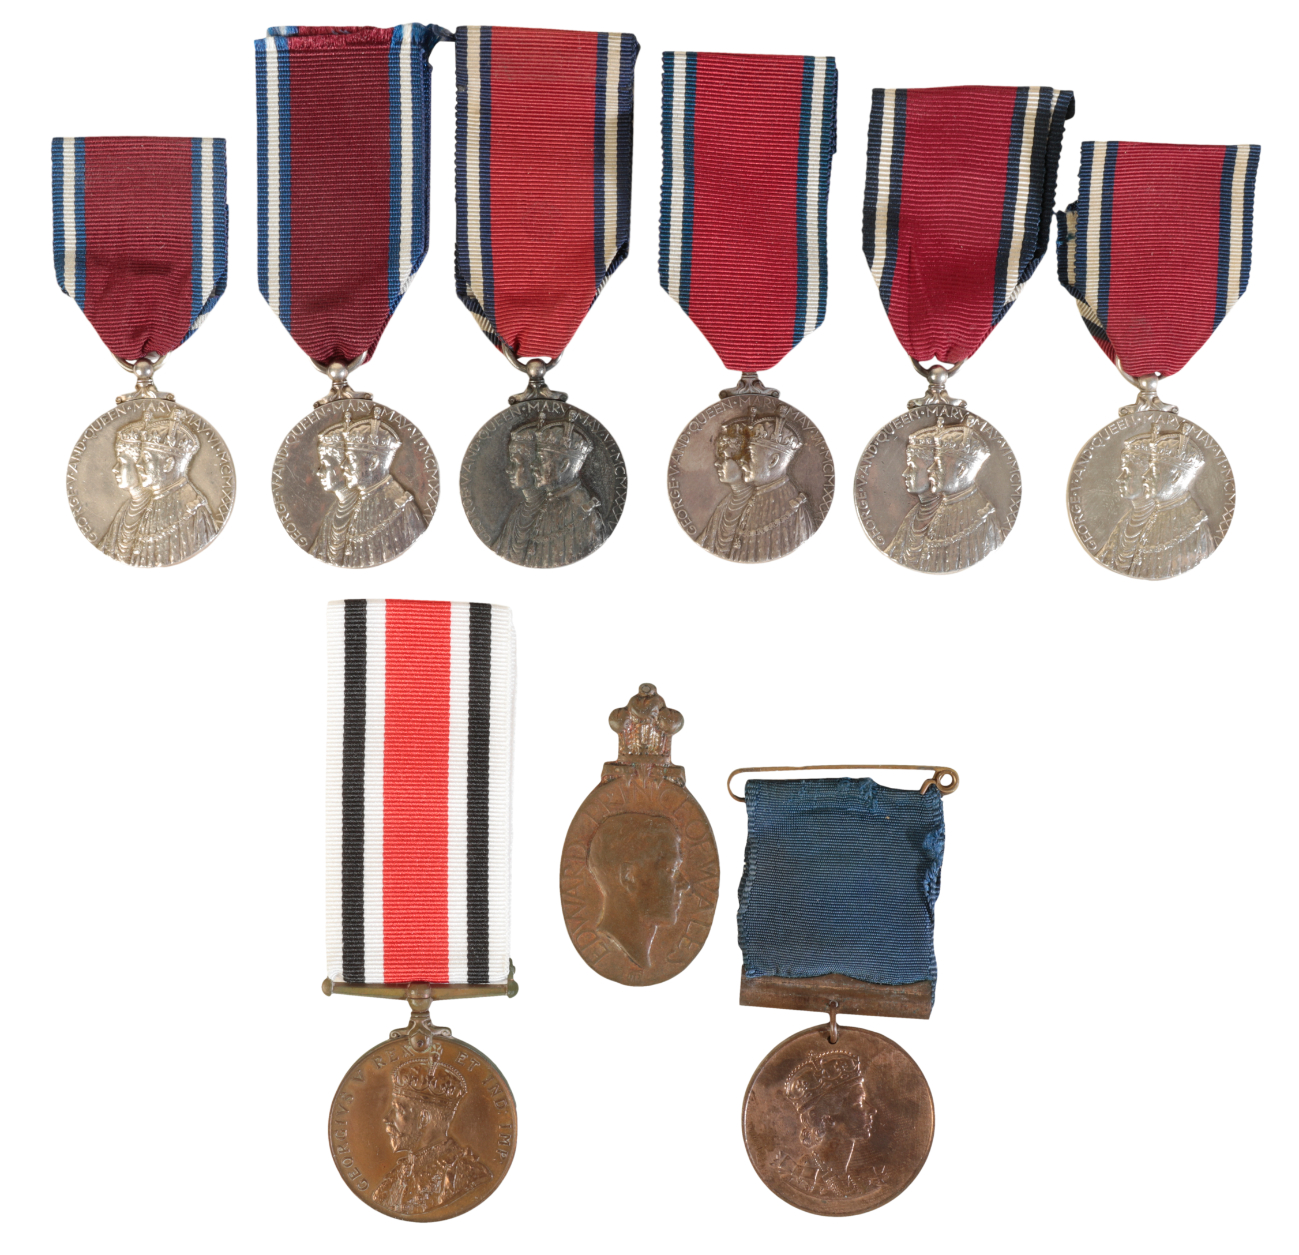 JUBILEE AND CORONATION MEDALS Medal 3add9b